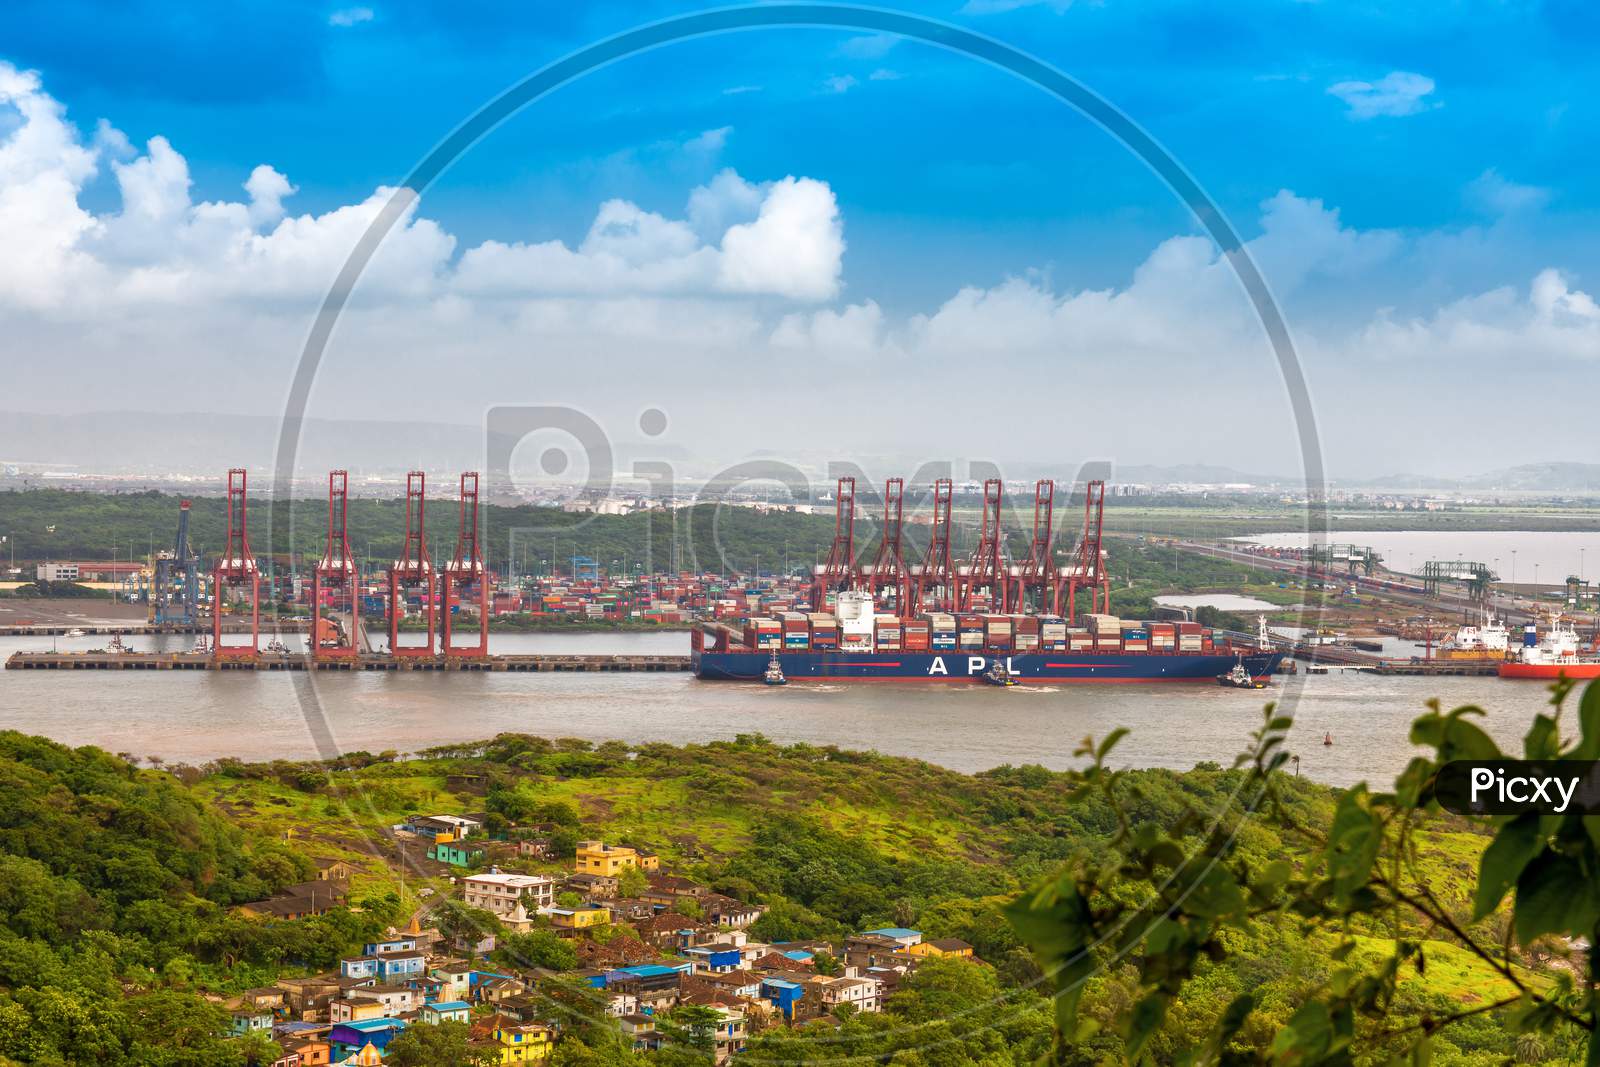 A wide view of Mumbai's local bus stop and port area. Mumbai Port is the largest container port in India situated near Mumbai.